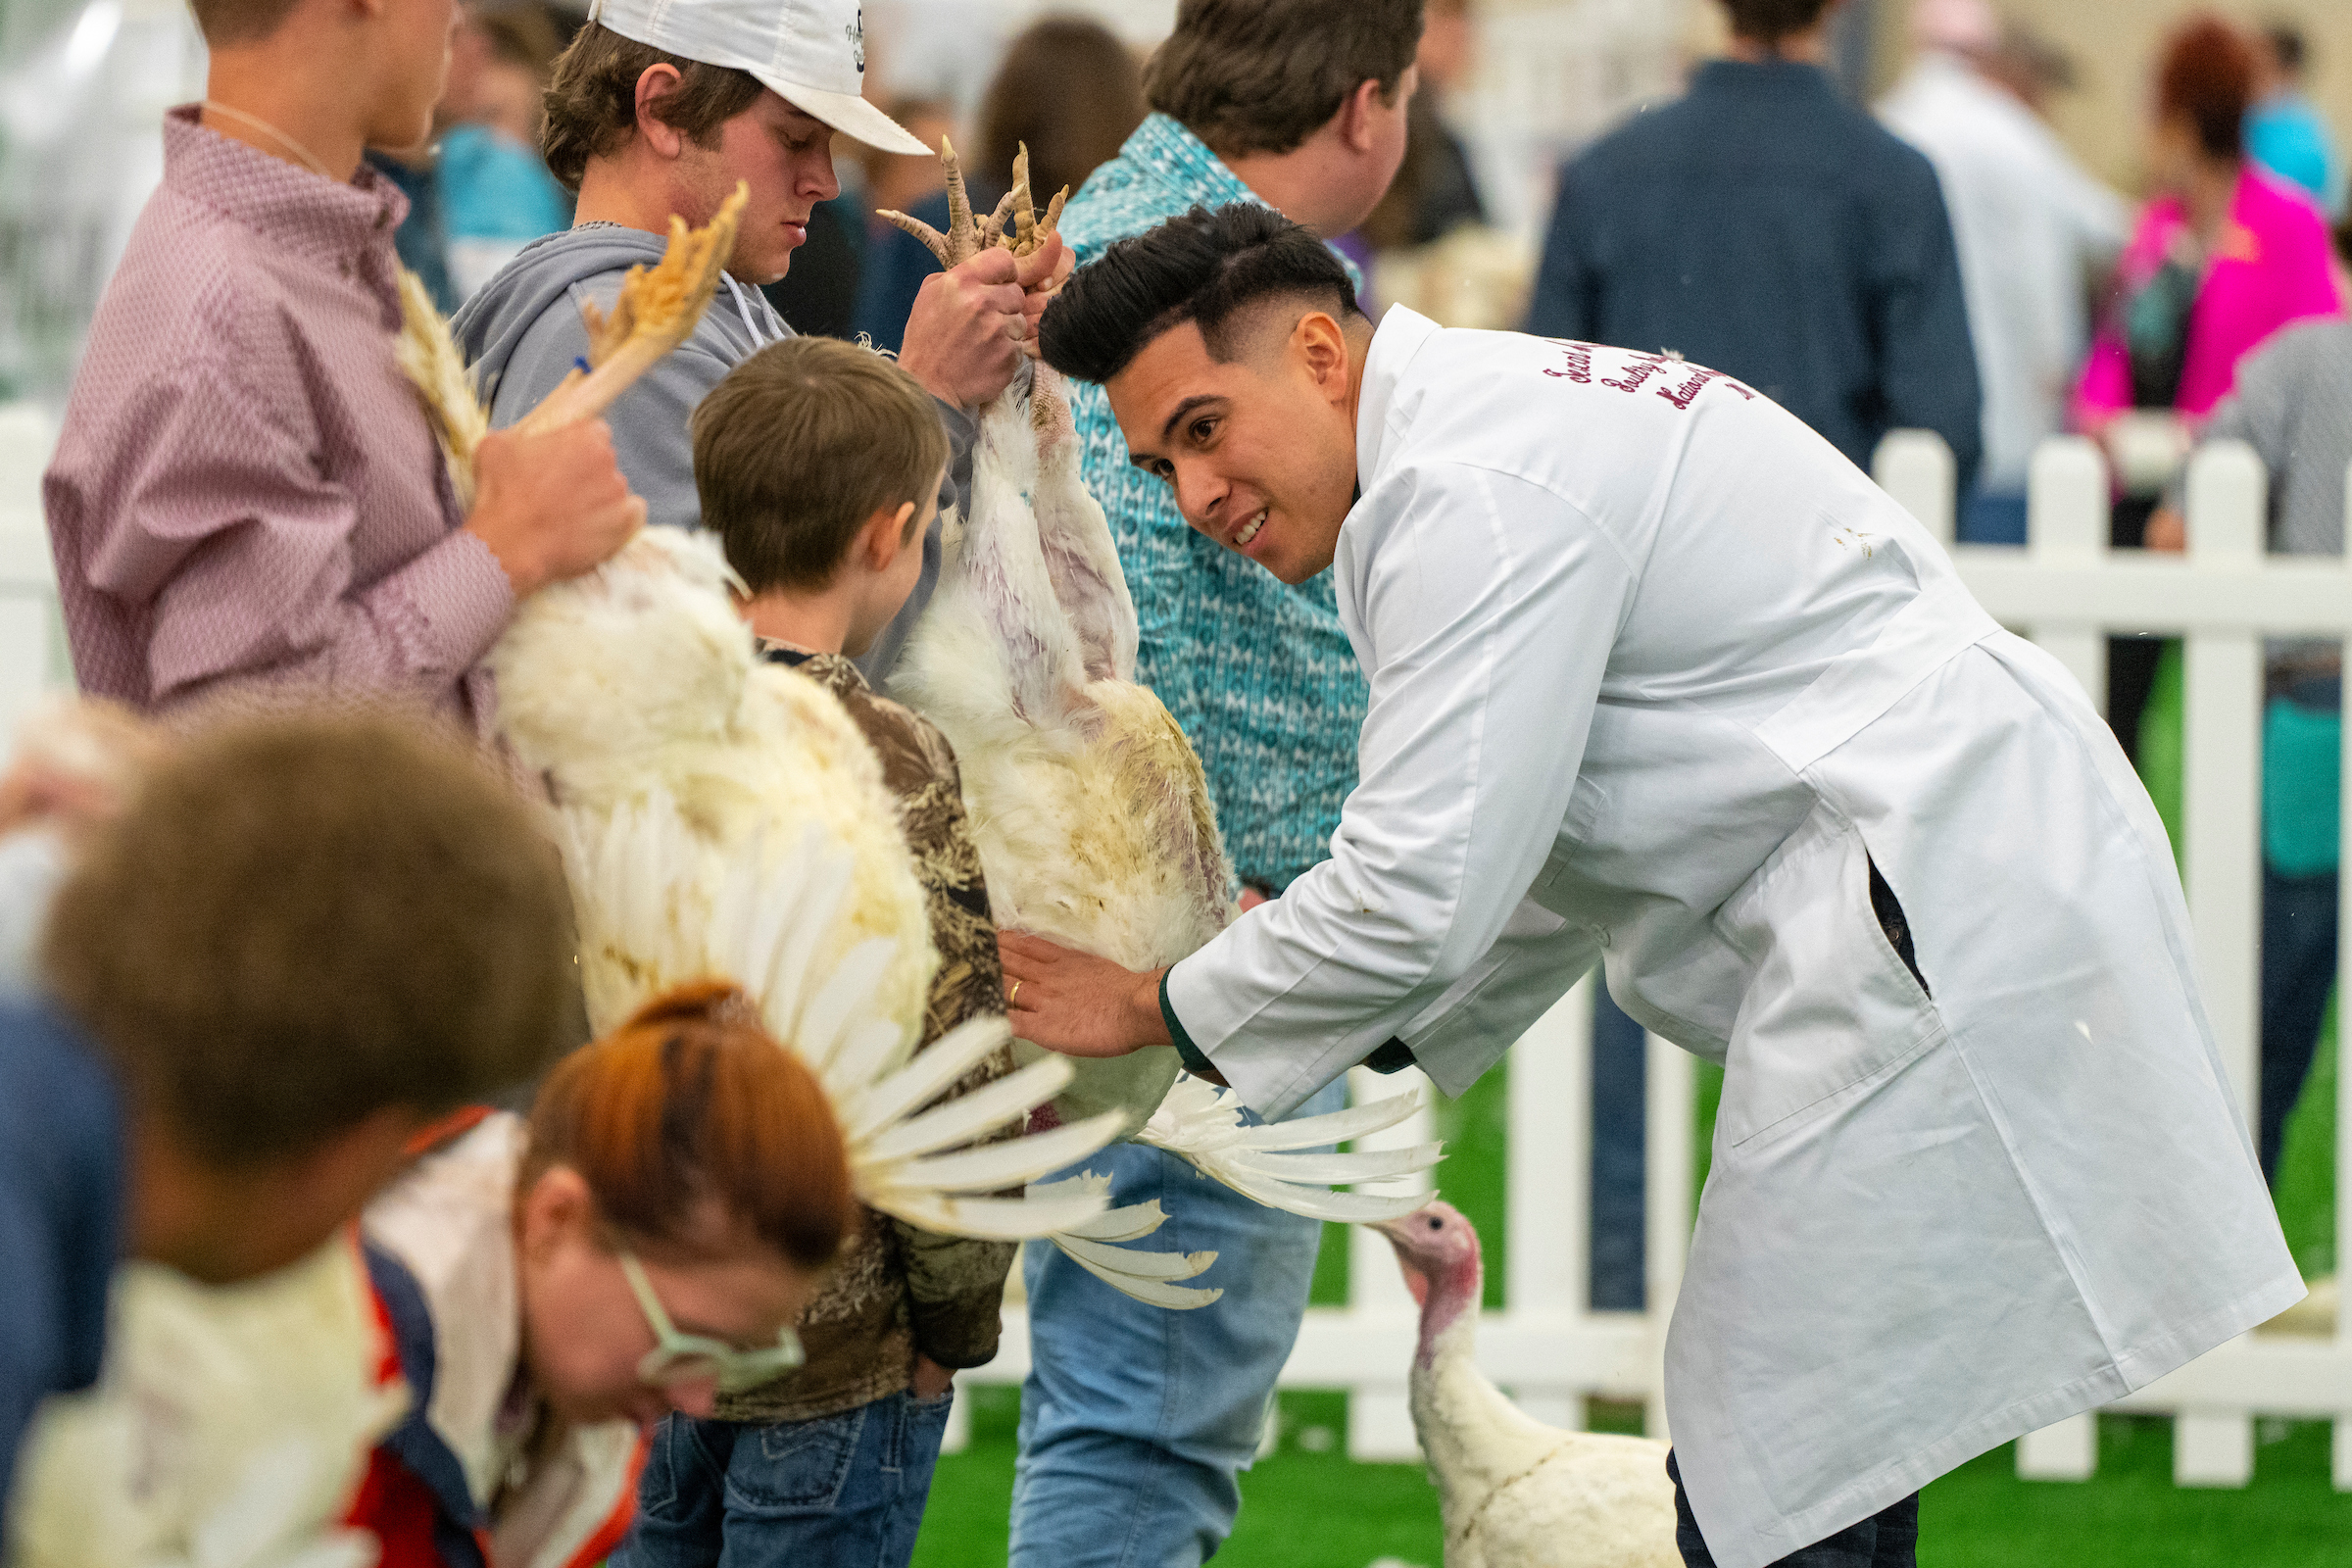 A graduate student examines a chicken held by a child during a poultry judging event